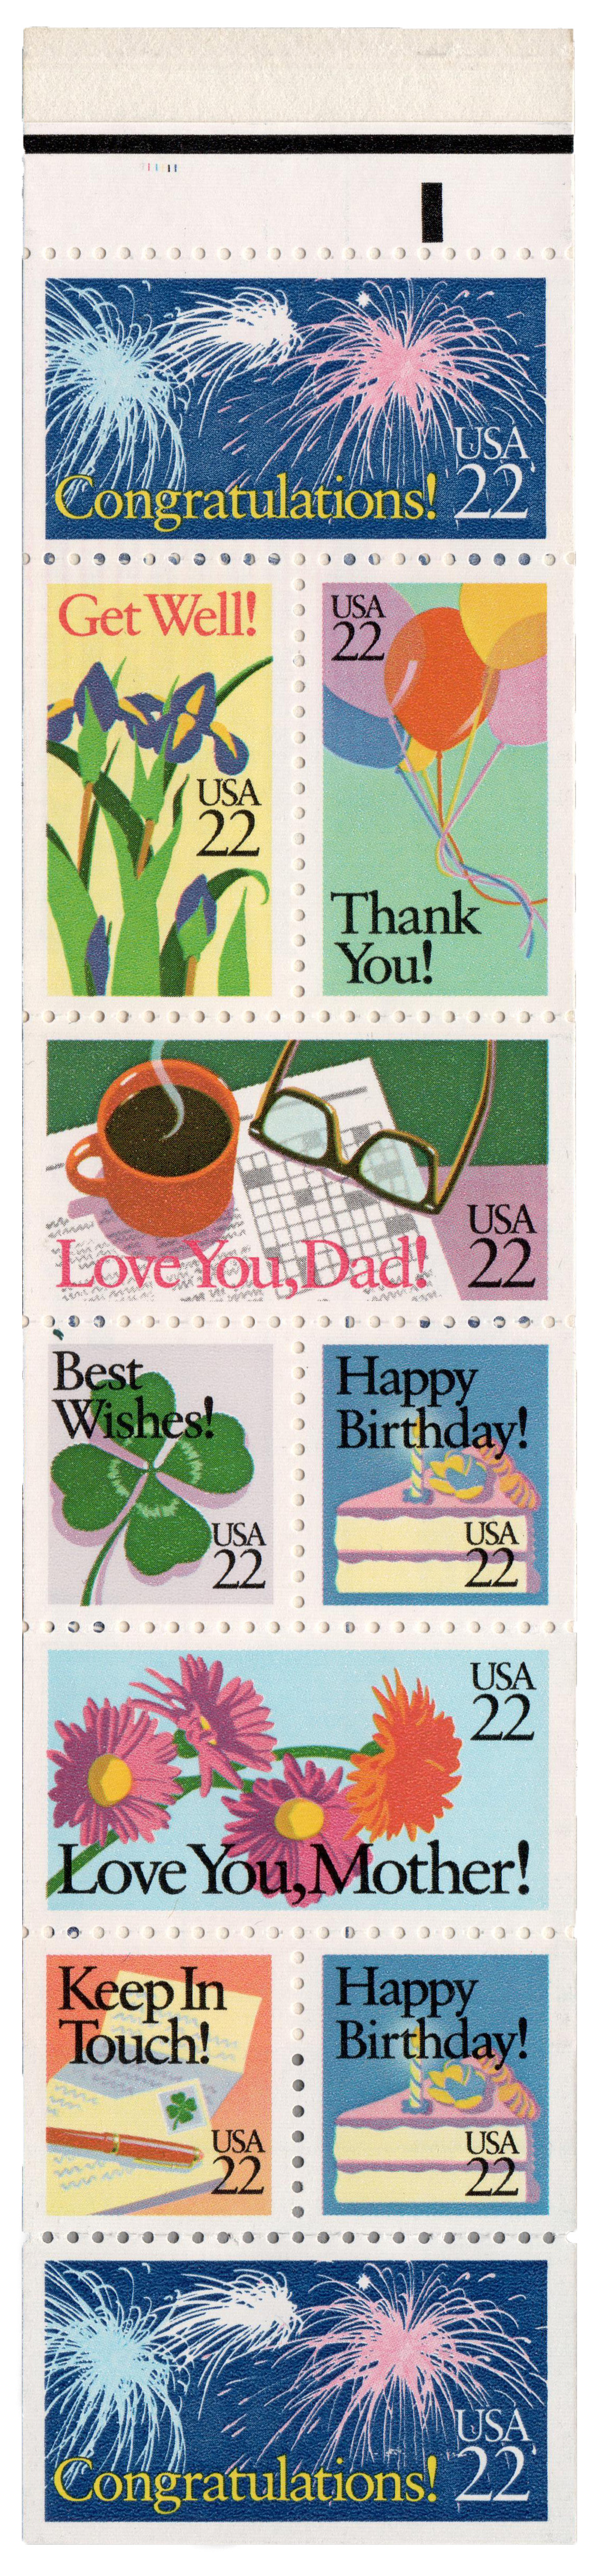 Five 22c Best Wishes Stamp Unused US Postage Stamps Pack of 5